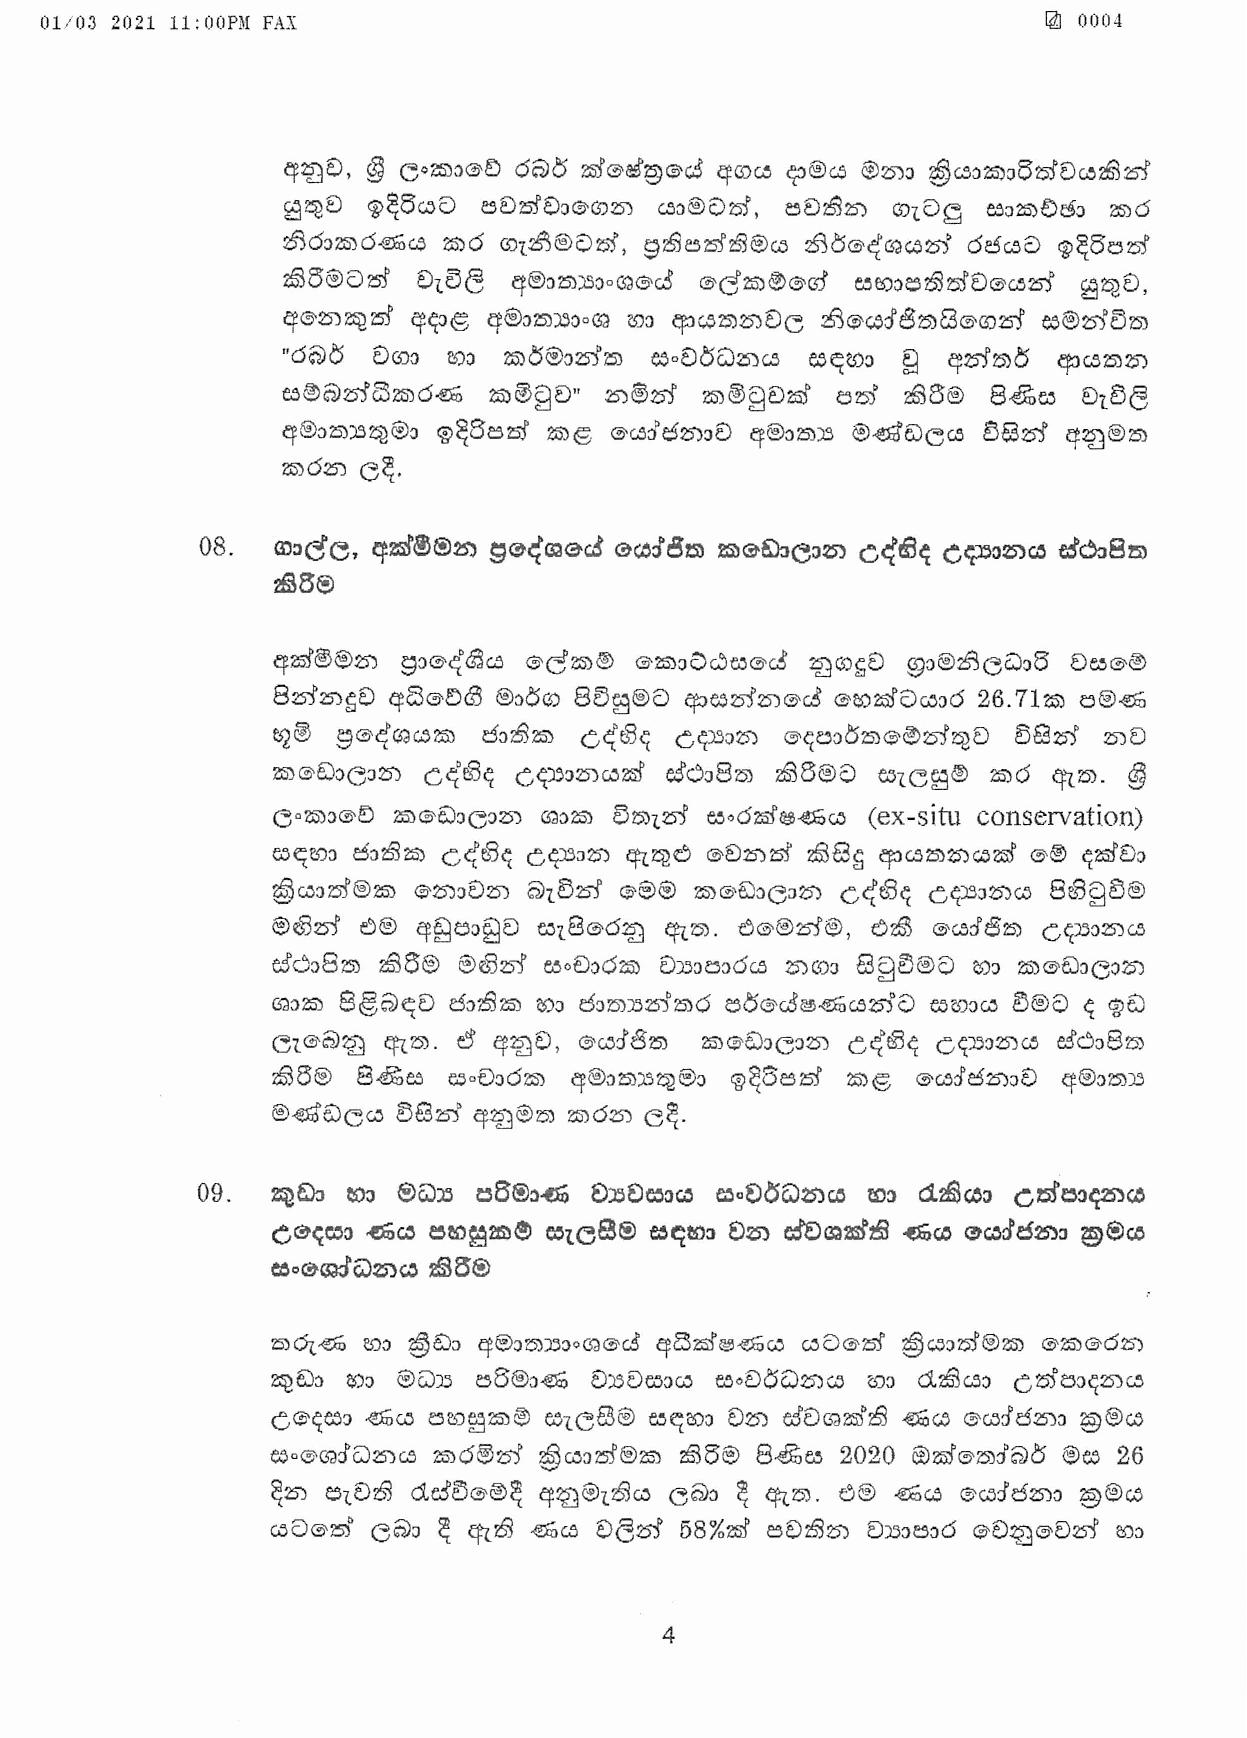 Cabinet Decision on 01.03.2021 page 004